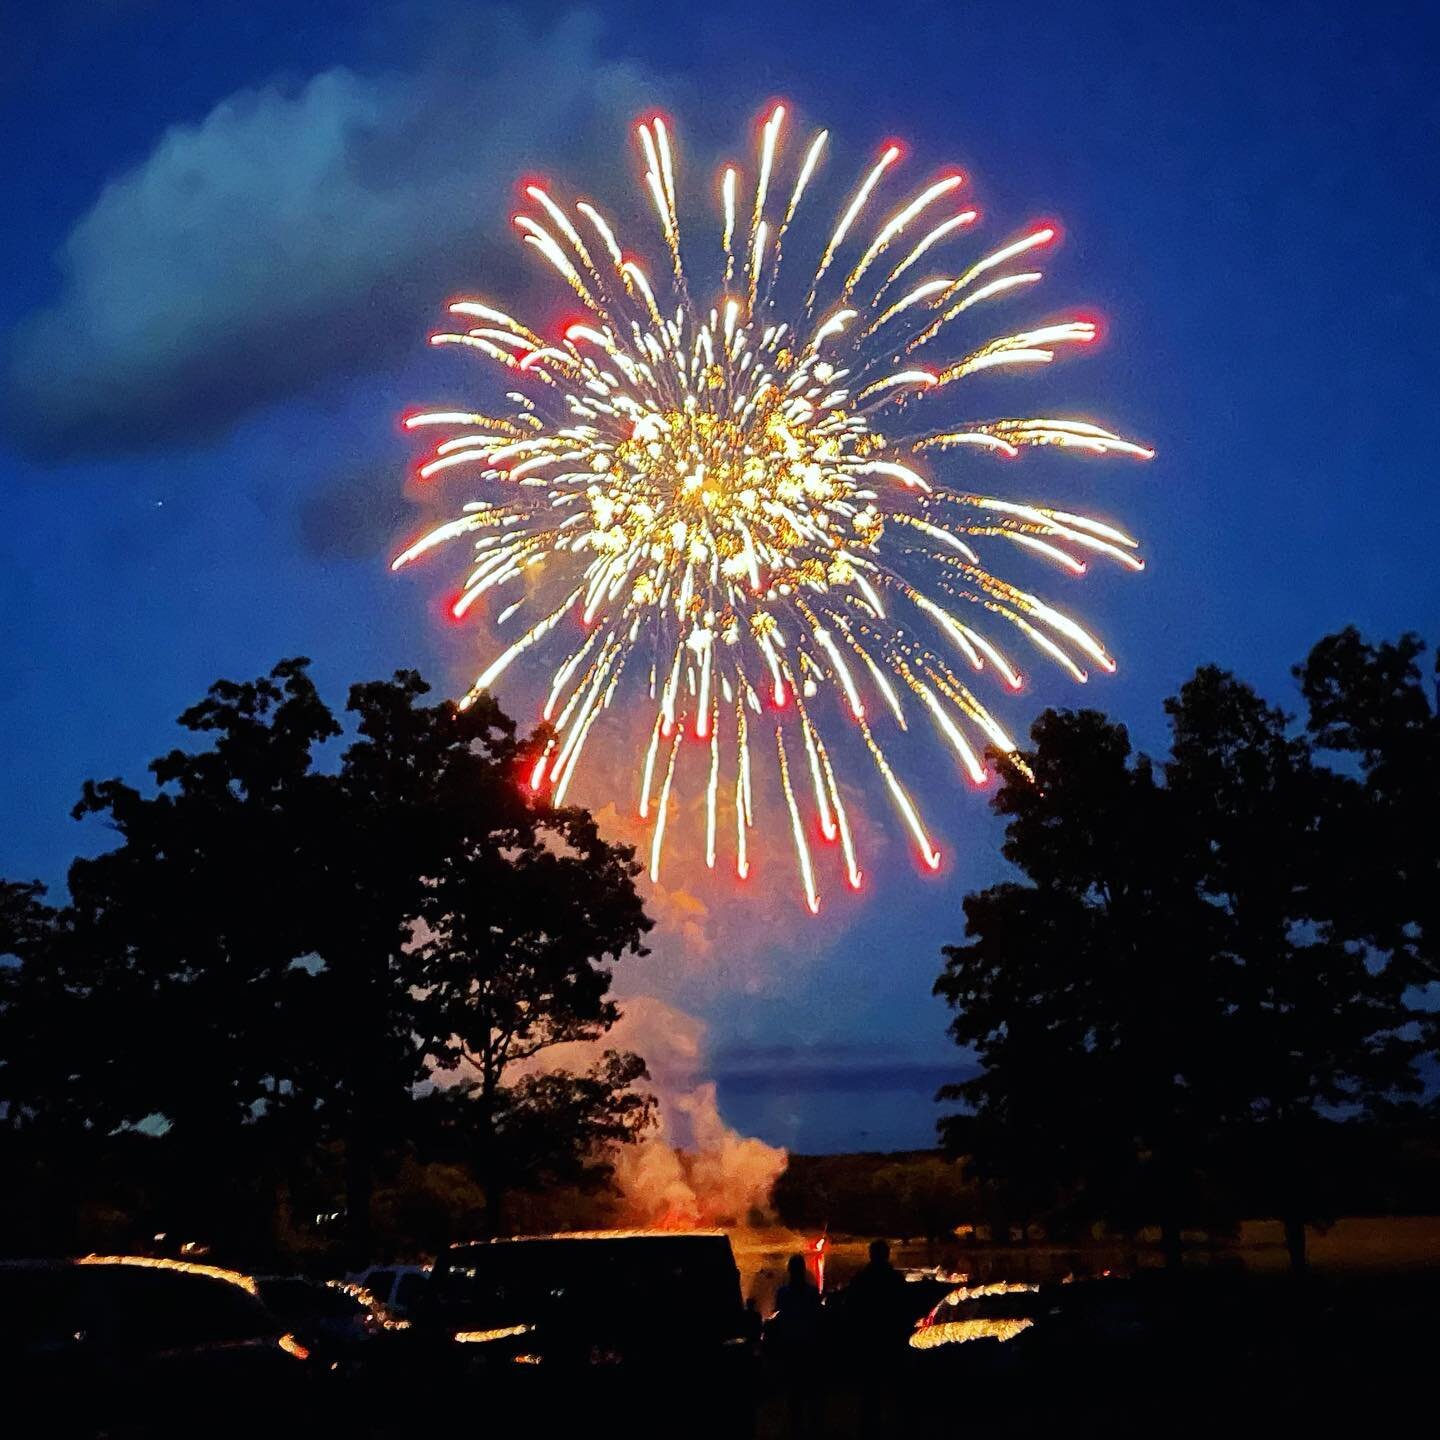 Happy 4th everyone! This is is from the fireworks display at Broadford Lake last night. More to come on top of the mountain this evening. We wish you the best however you are celebrating this special day 🇺🇸 

#garrettcountymd